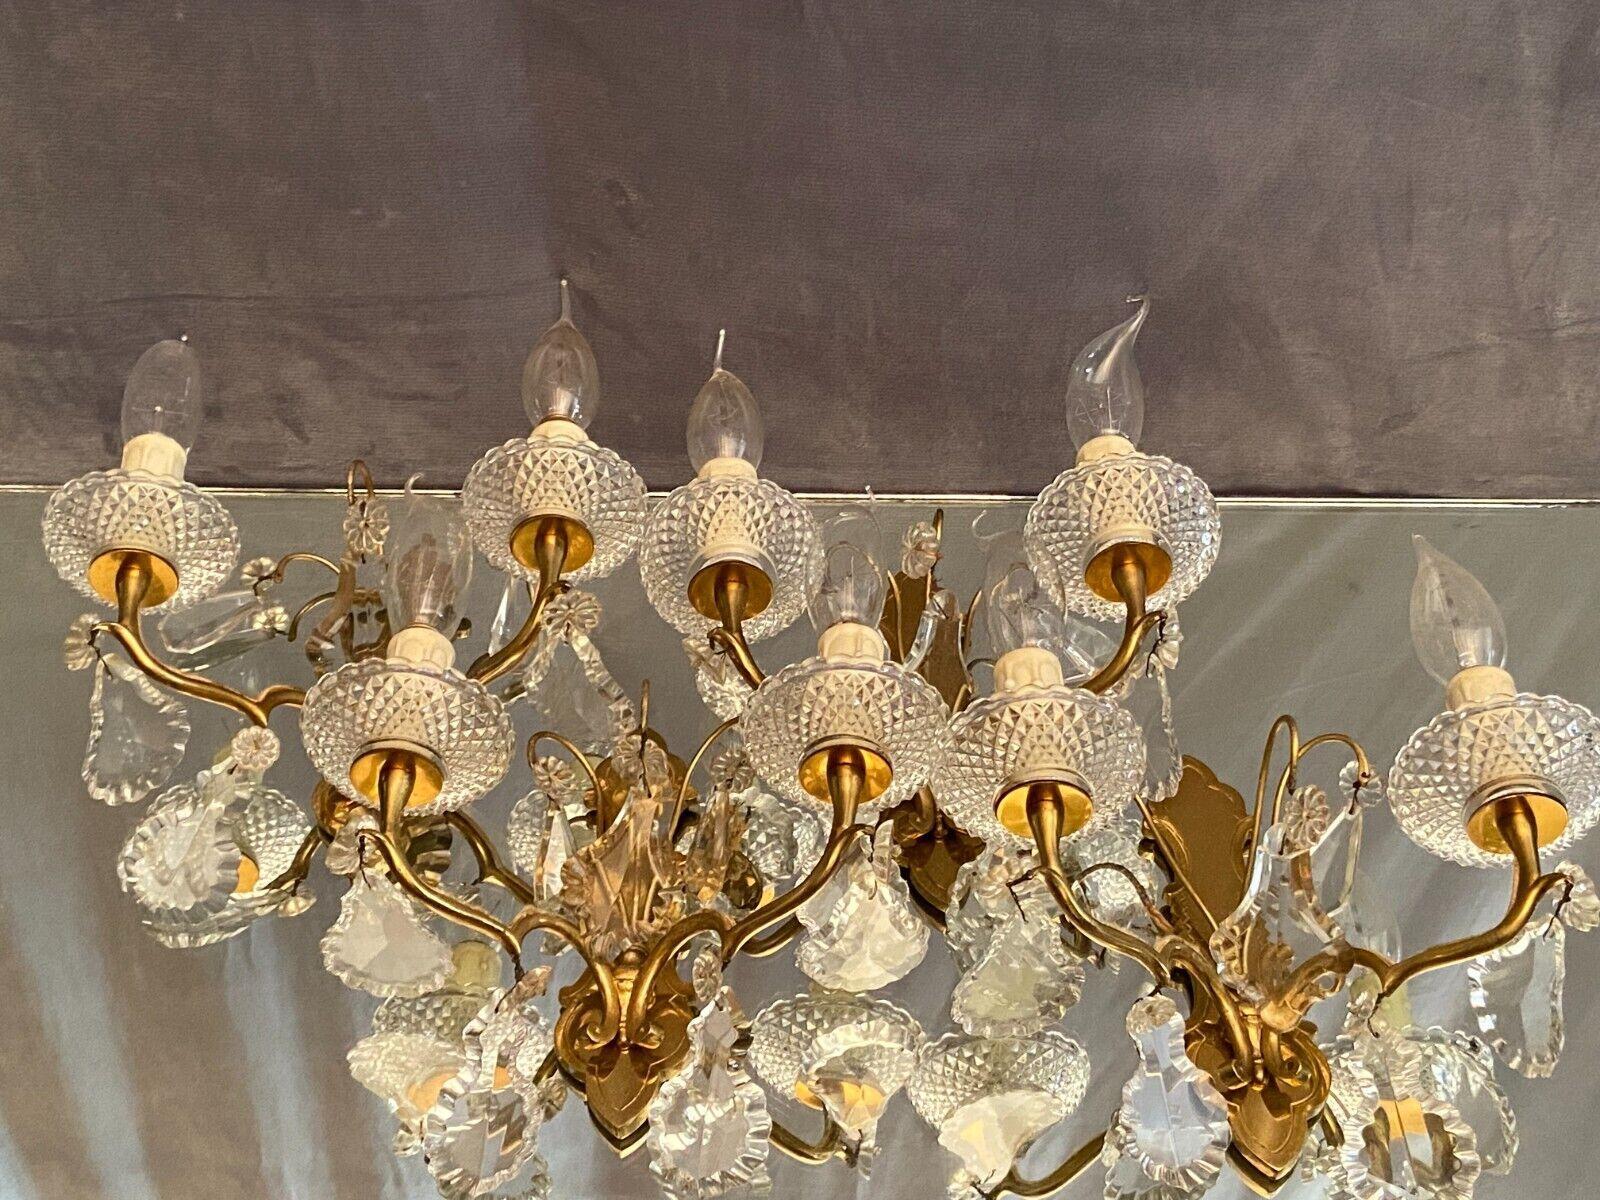 Stunning Set of `4 Matched Louis XV style Gilt Bronze with Cut Crystal Wall Sconces attributed to Baccarat France. Very high quality. Purchased from a residence in Nice France.